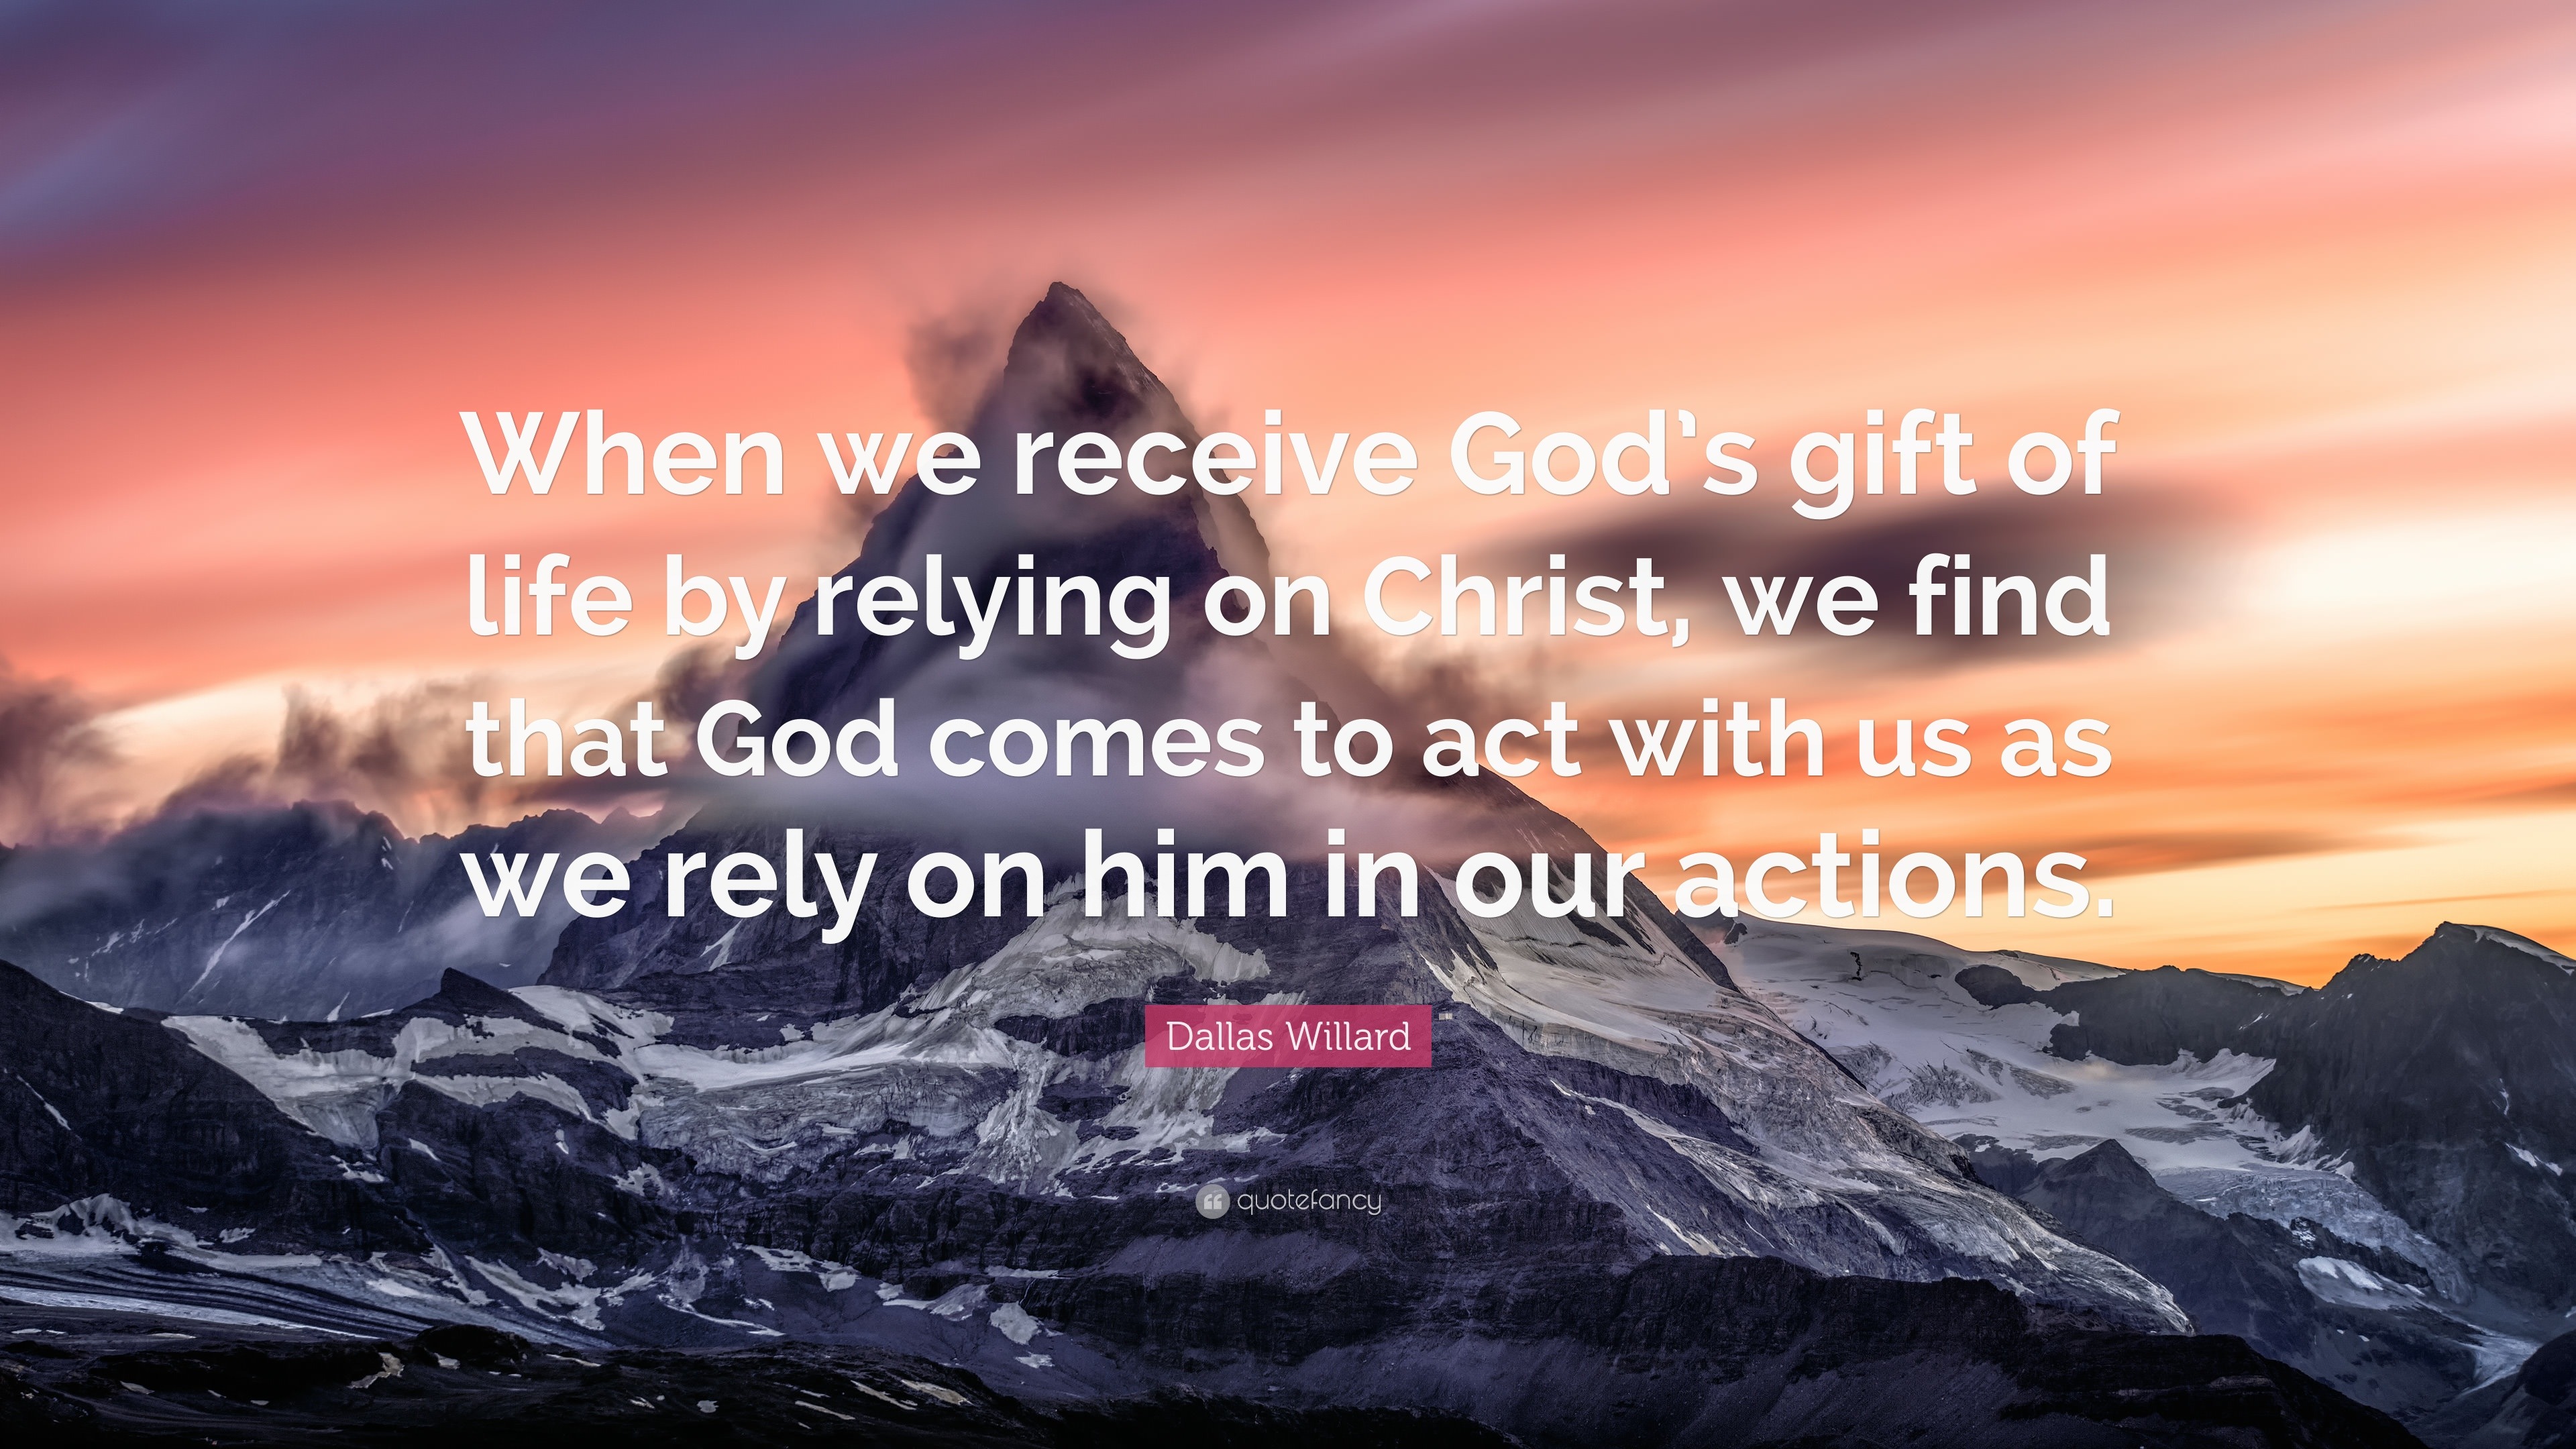 Dallas Willard Quote: “When we receive God’s gift of life by relying on ...